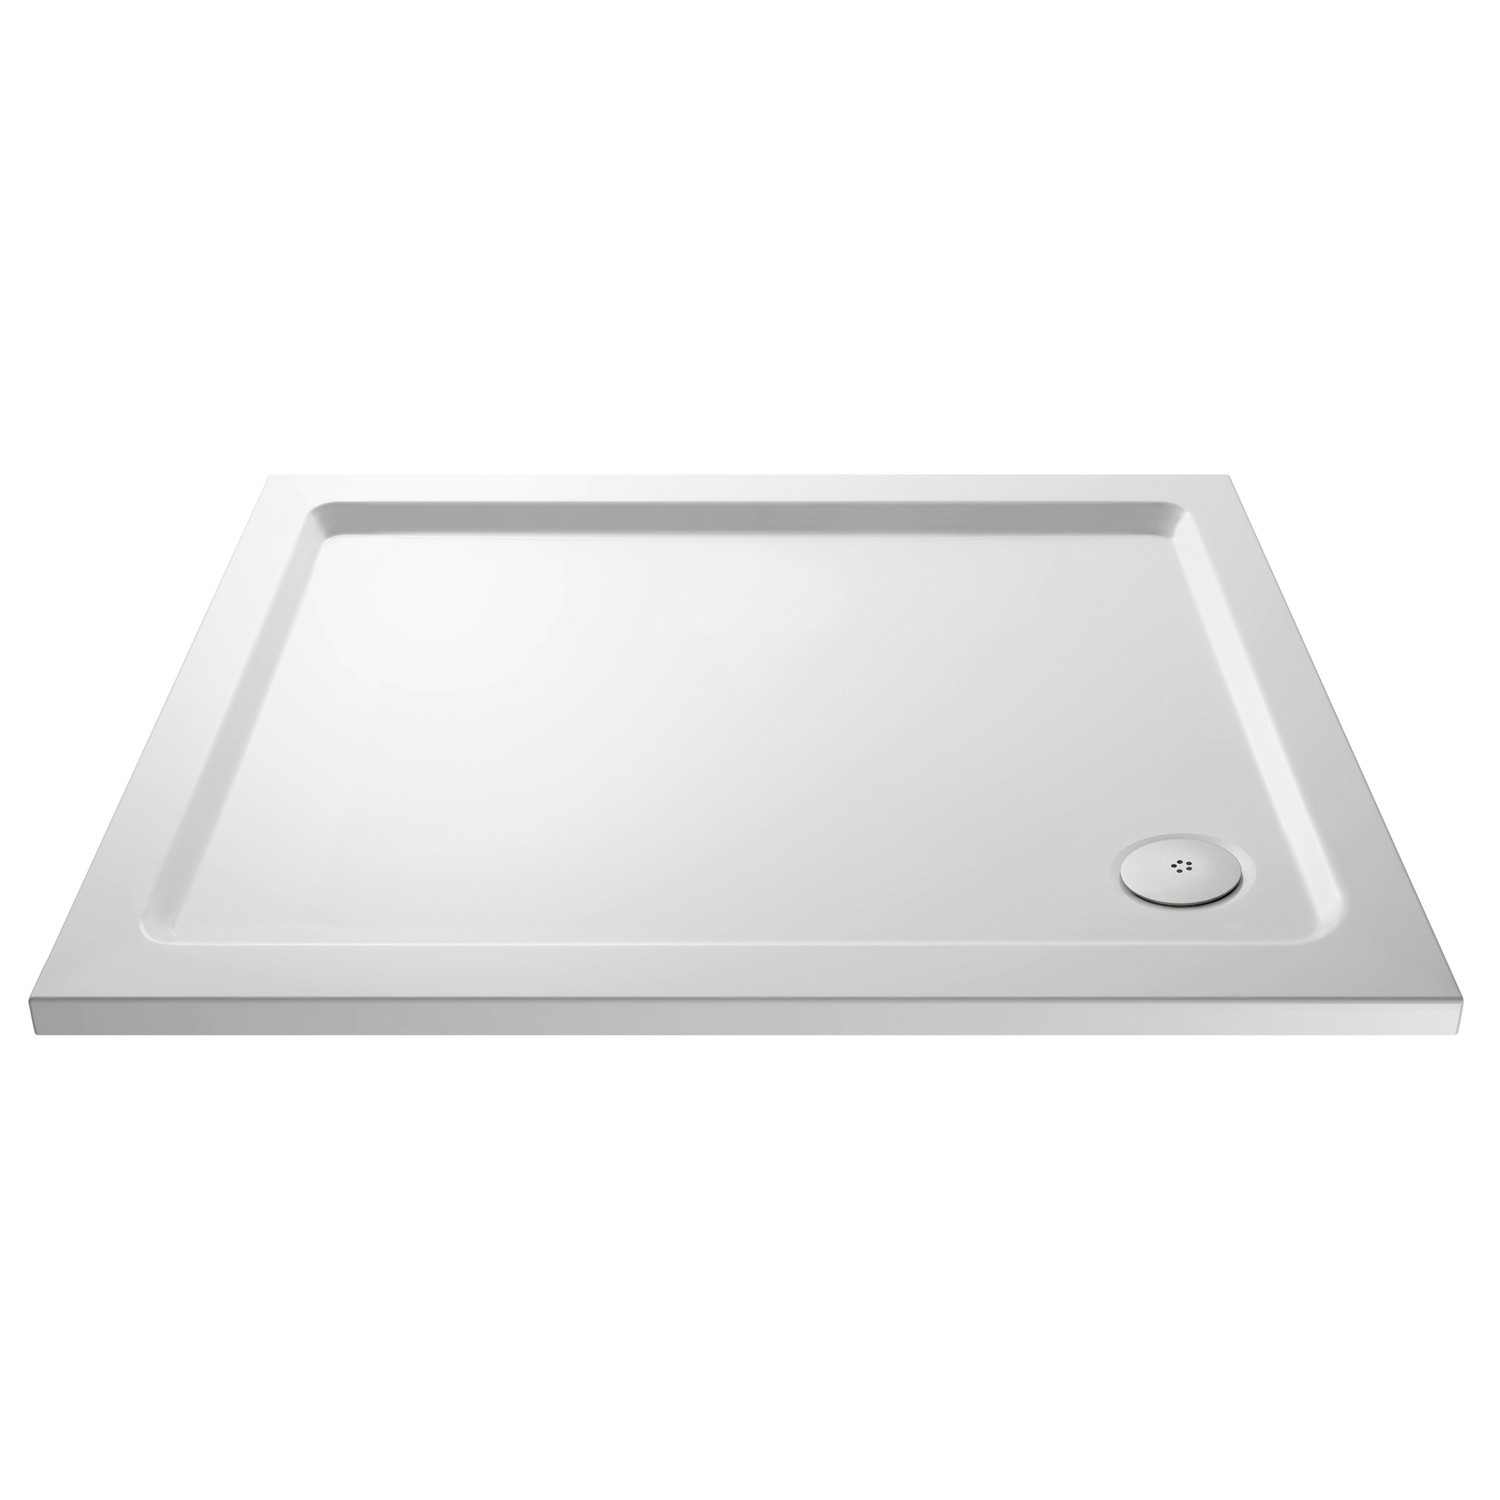 Low Profile Rectangular Shower Tray 900 x 700mm - Purity